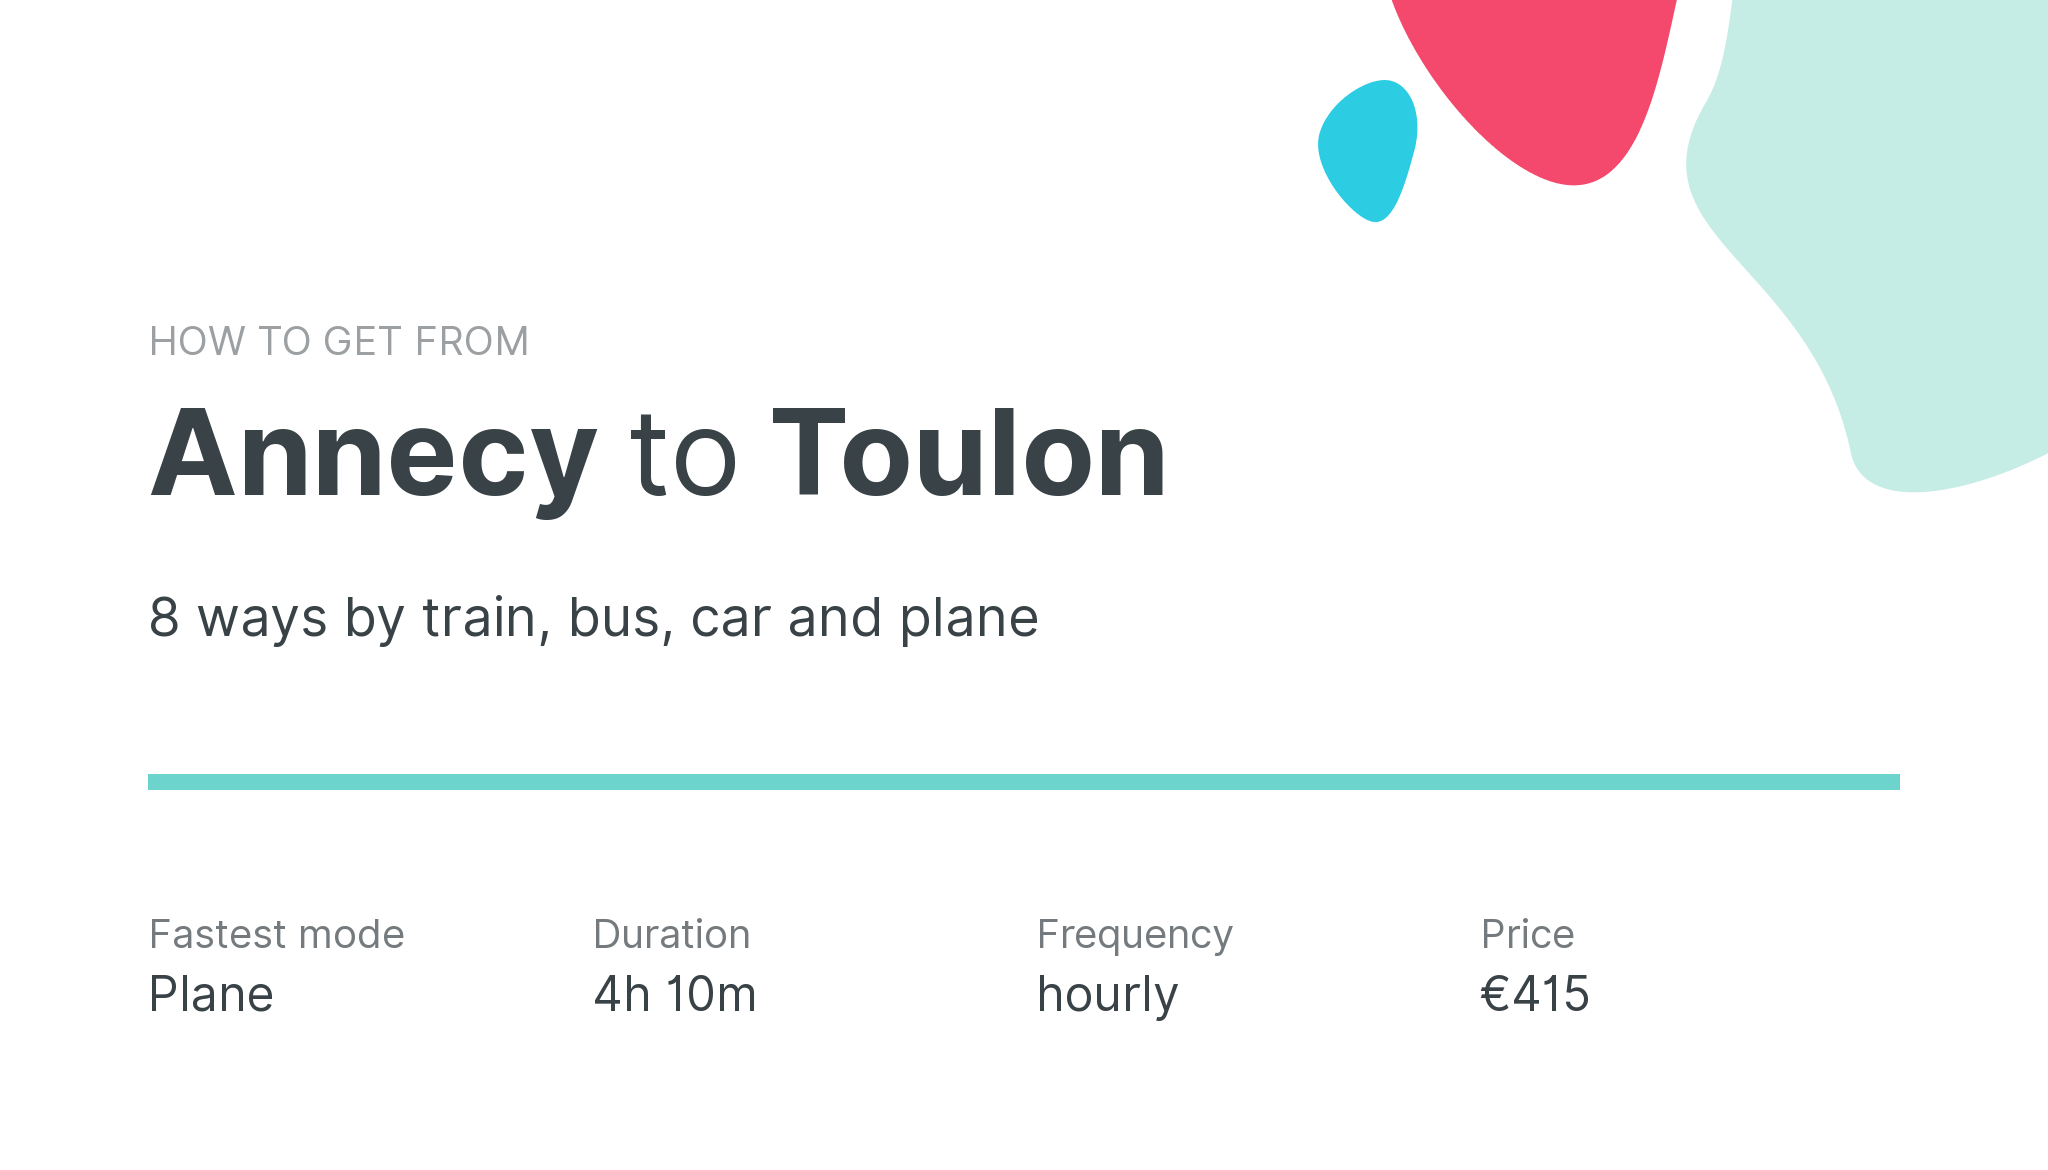 How do I get from Annecy to Toulon